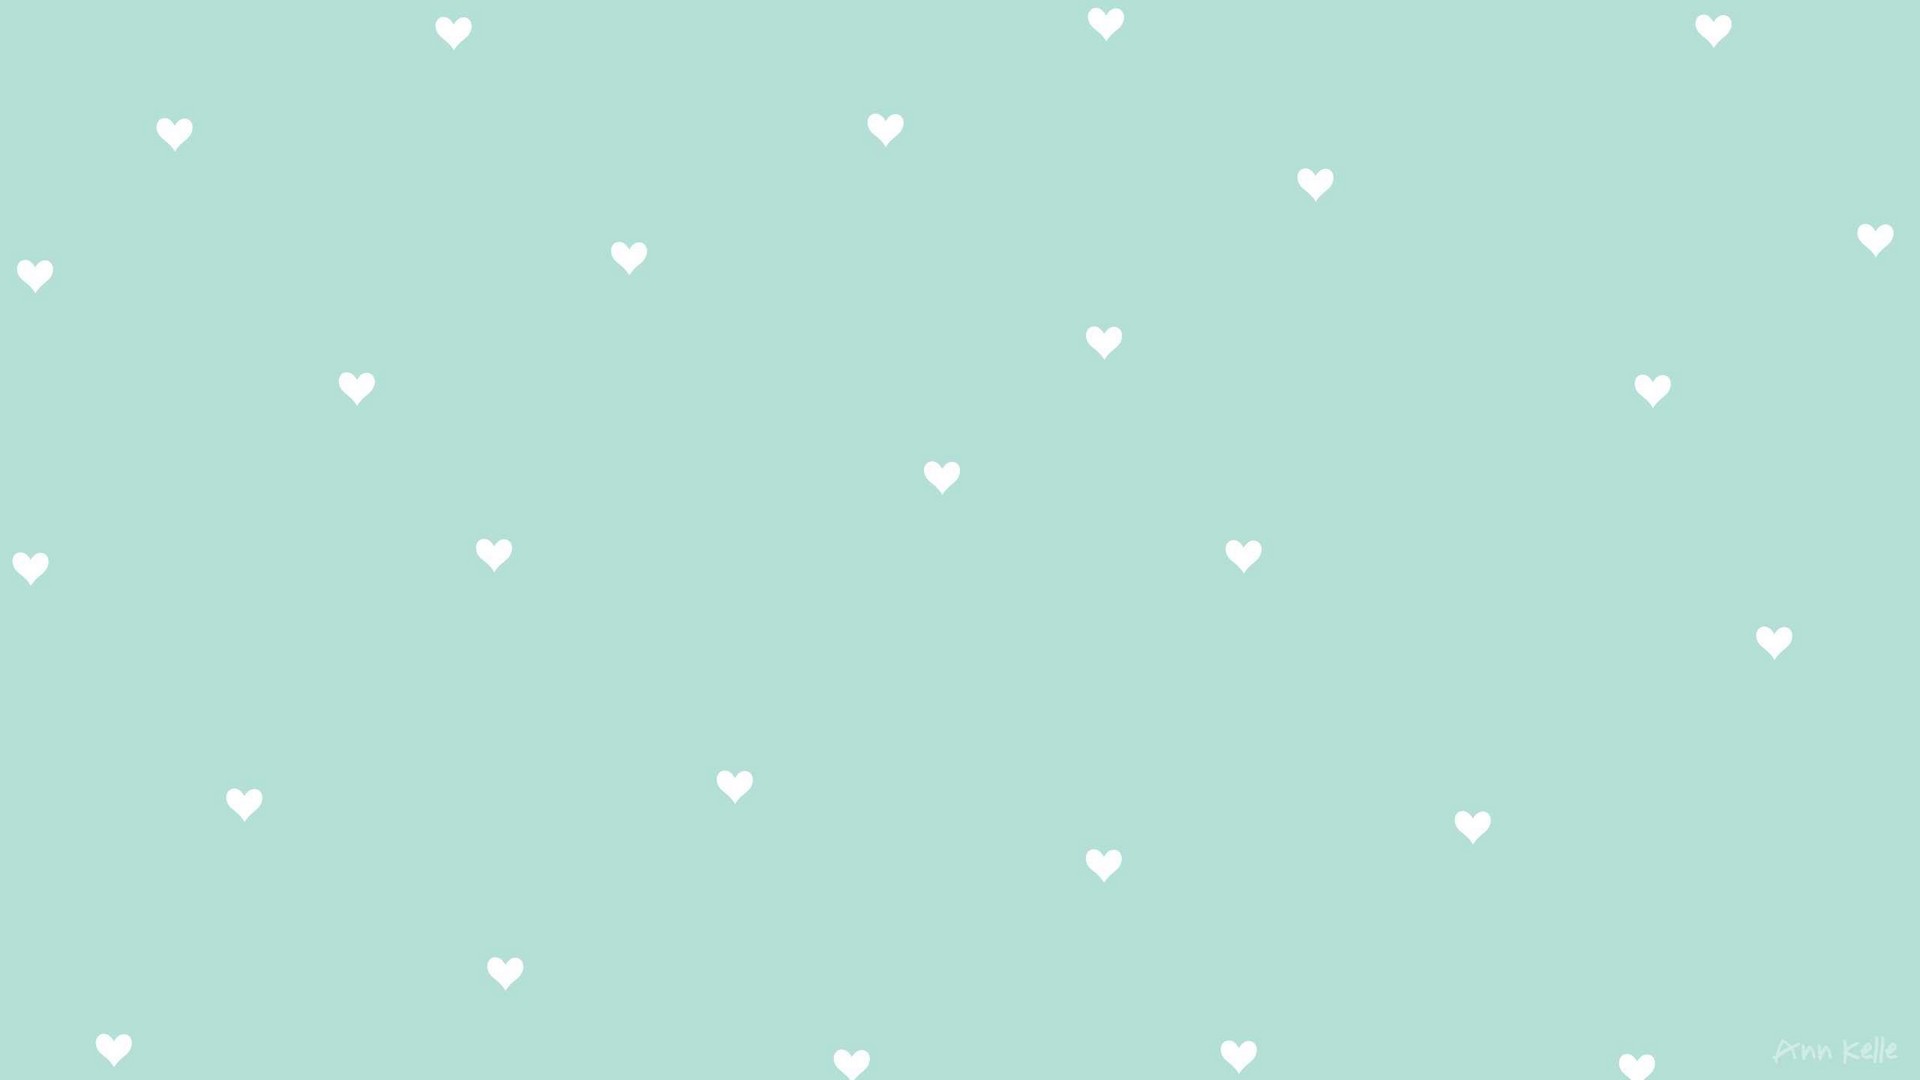 Wallpaper Mint Green HD with image resolution 1920x1080 pixel. You can make this wallpaper for your Desktop Computer Backgrounds, Mac Wallpapers, Android Lock screen or iPhone Screensavers